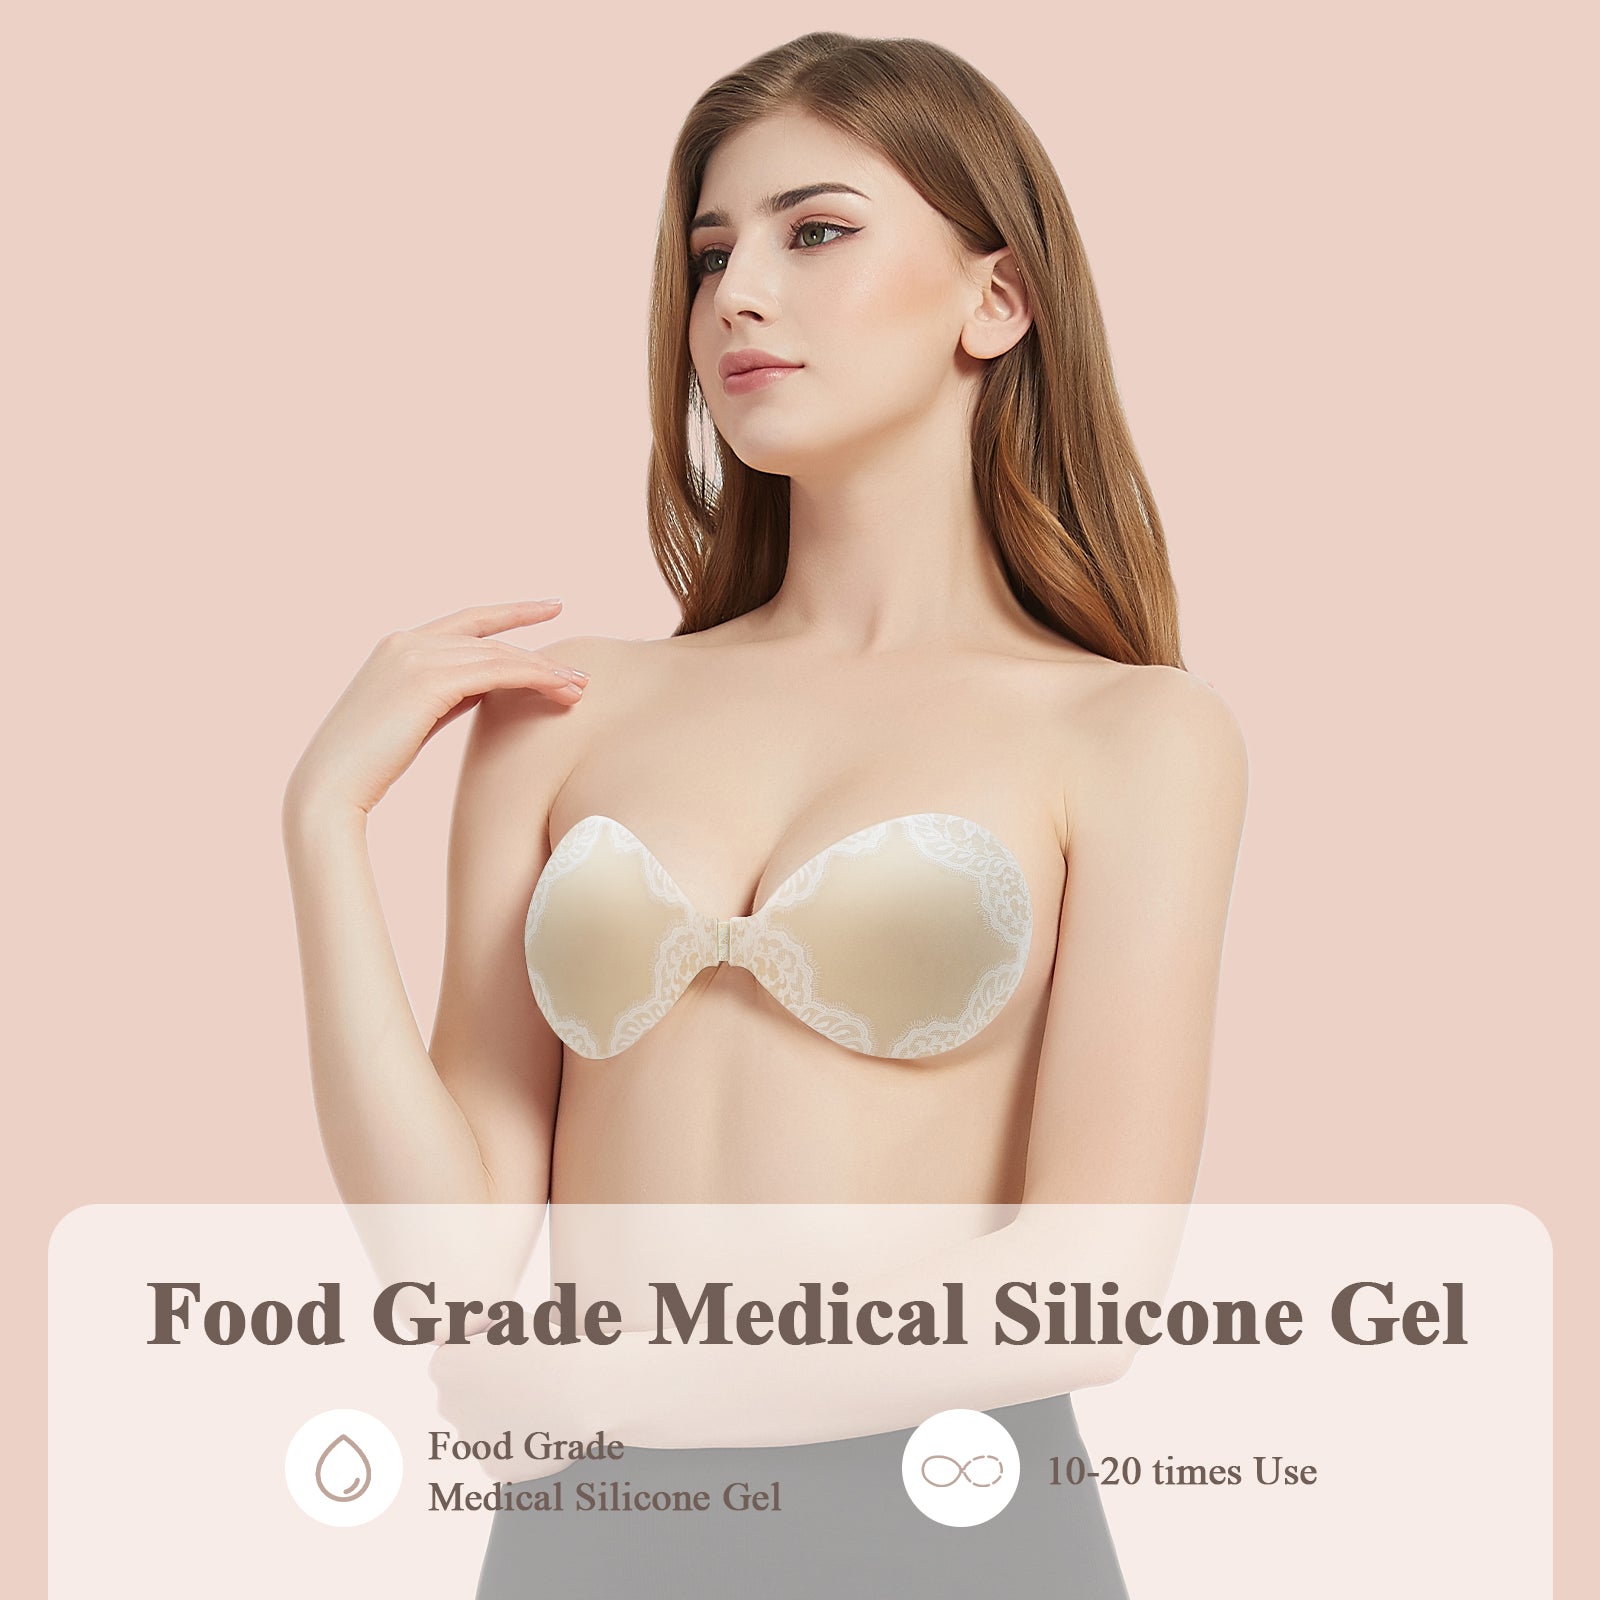 Adhesive Bra For Wedding Dress, Push-Up, Thick Silicon Breast Pad, Strapless,  Sleepwear, No Exposure